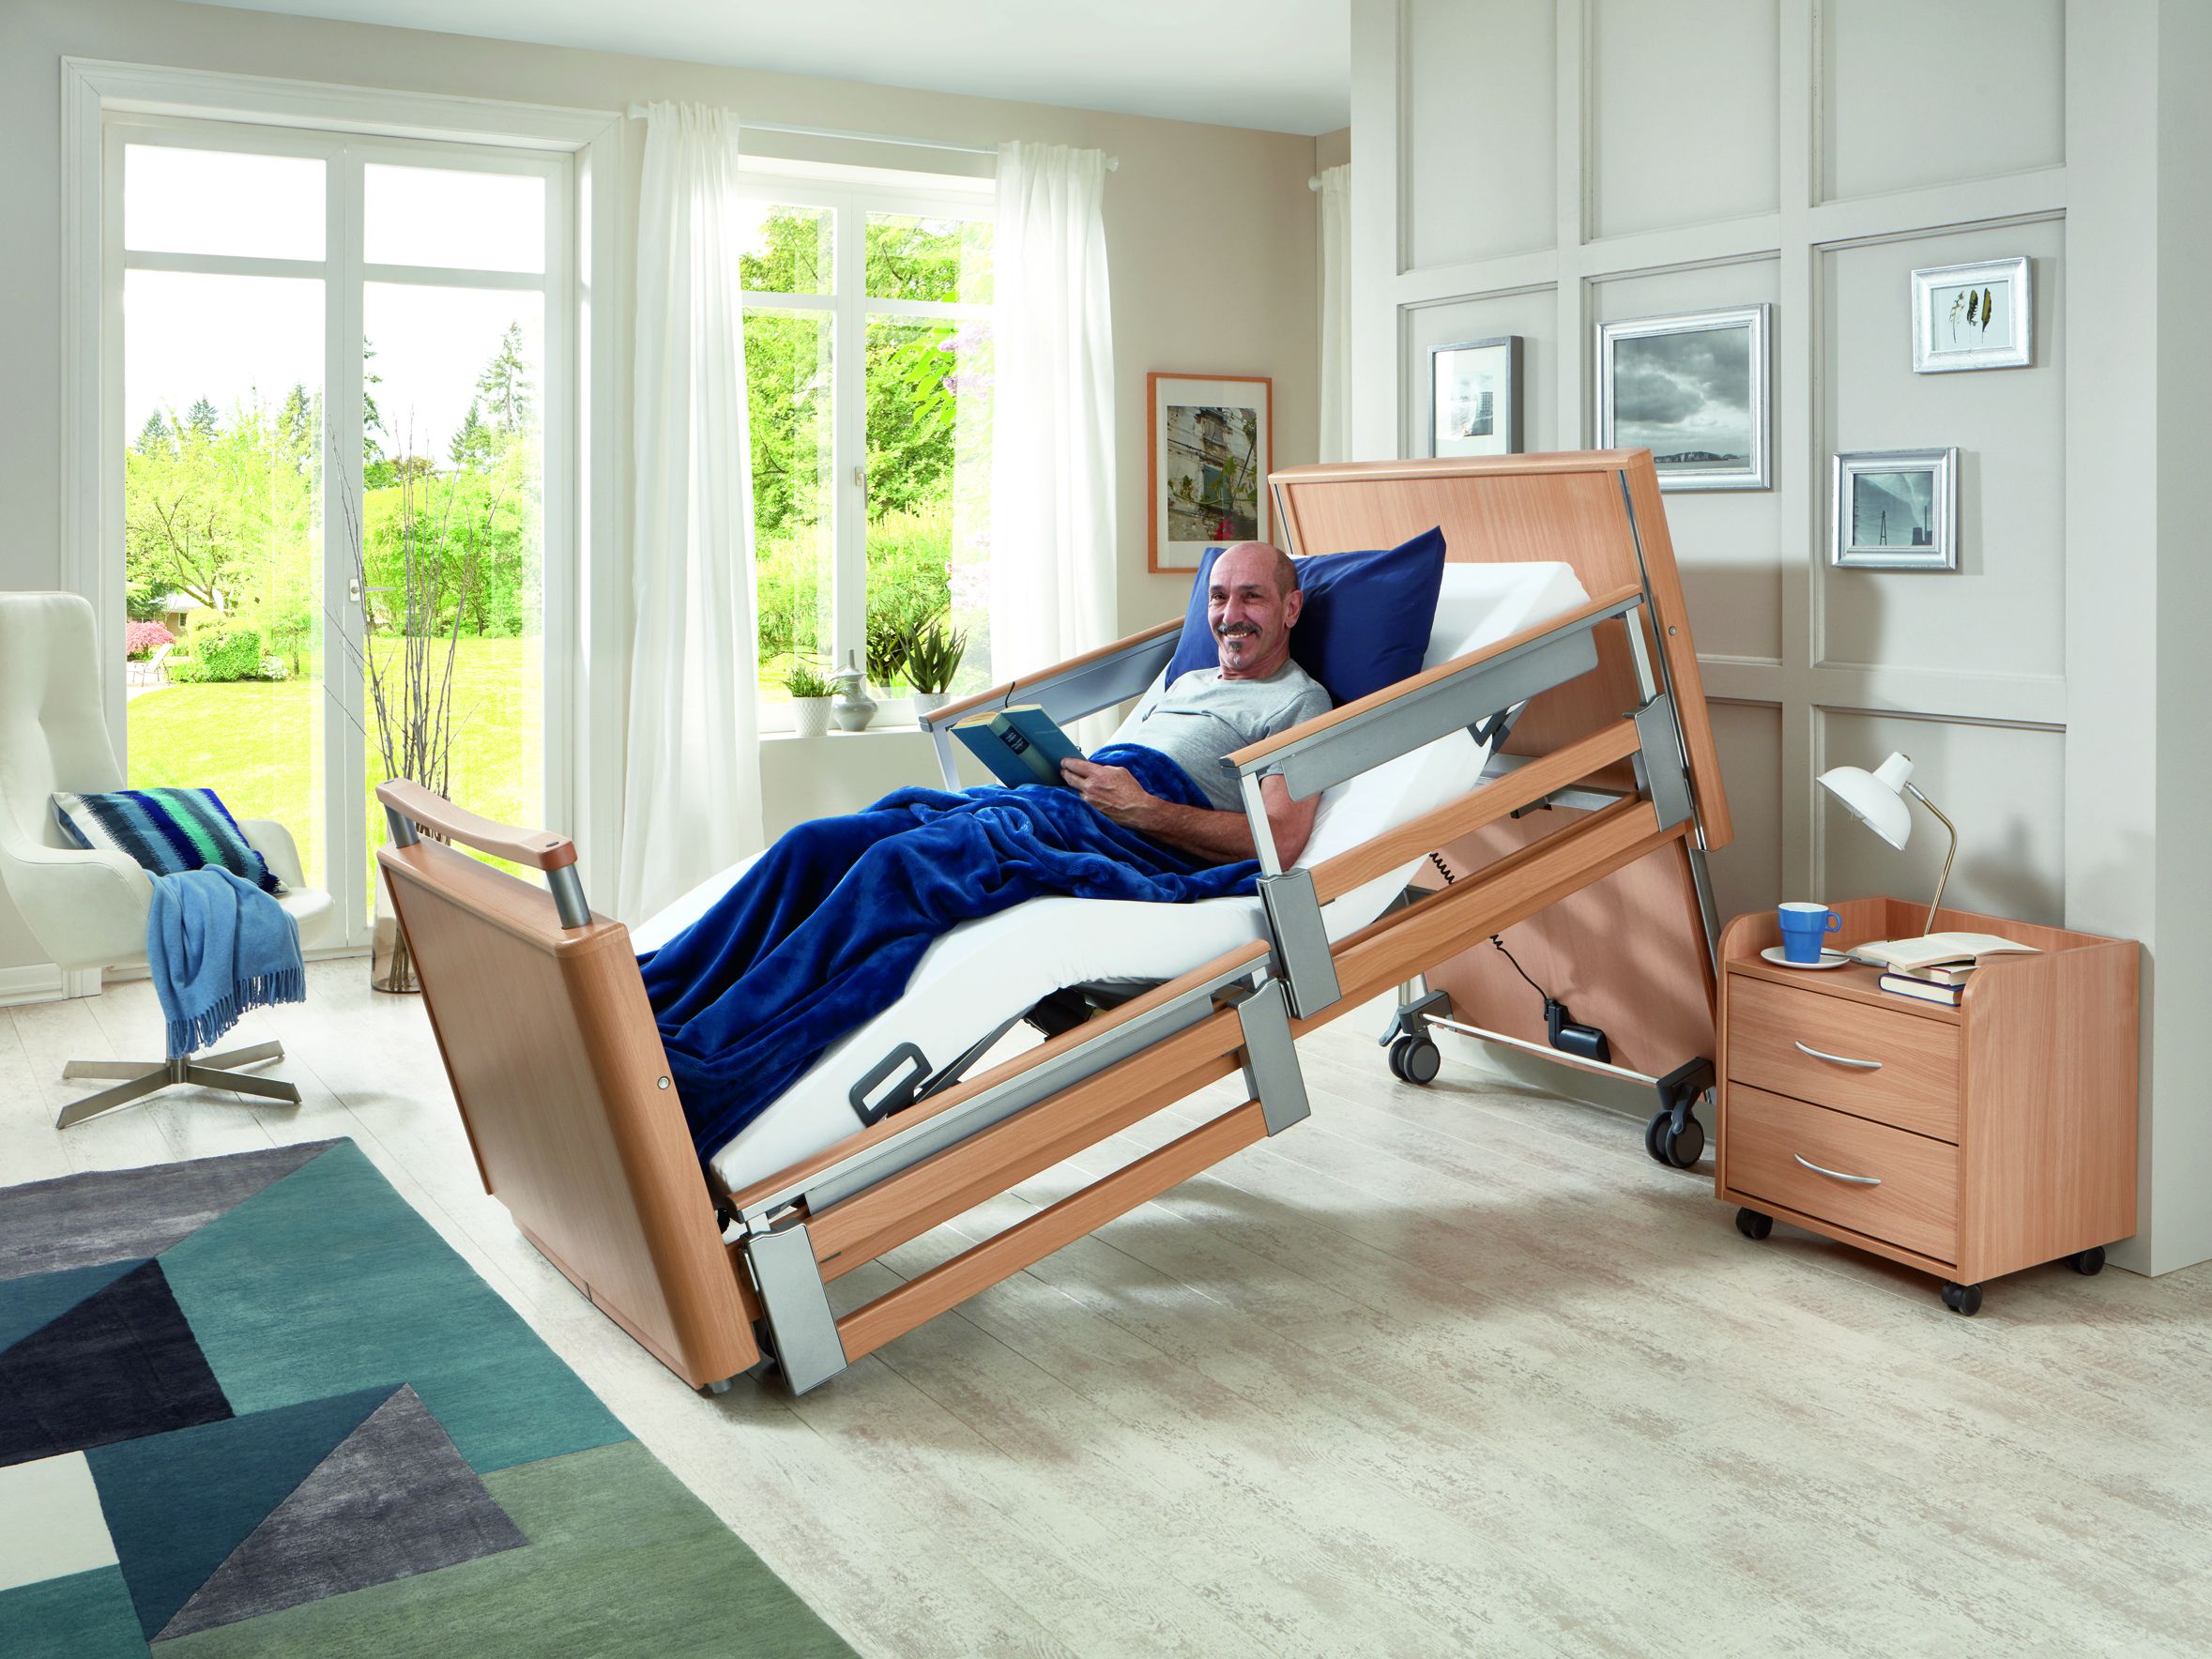 Sitting position of the Inovia care bed